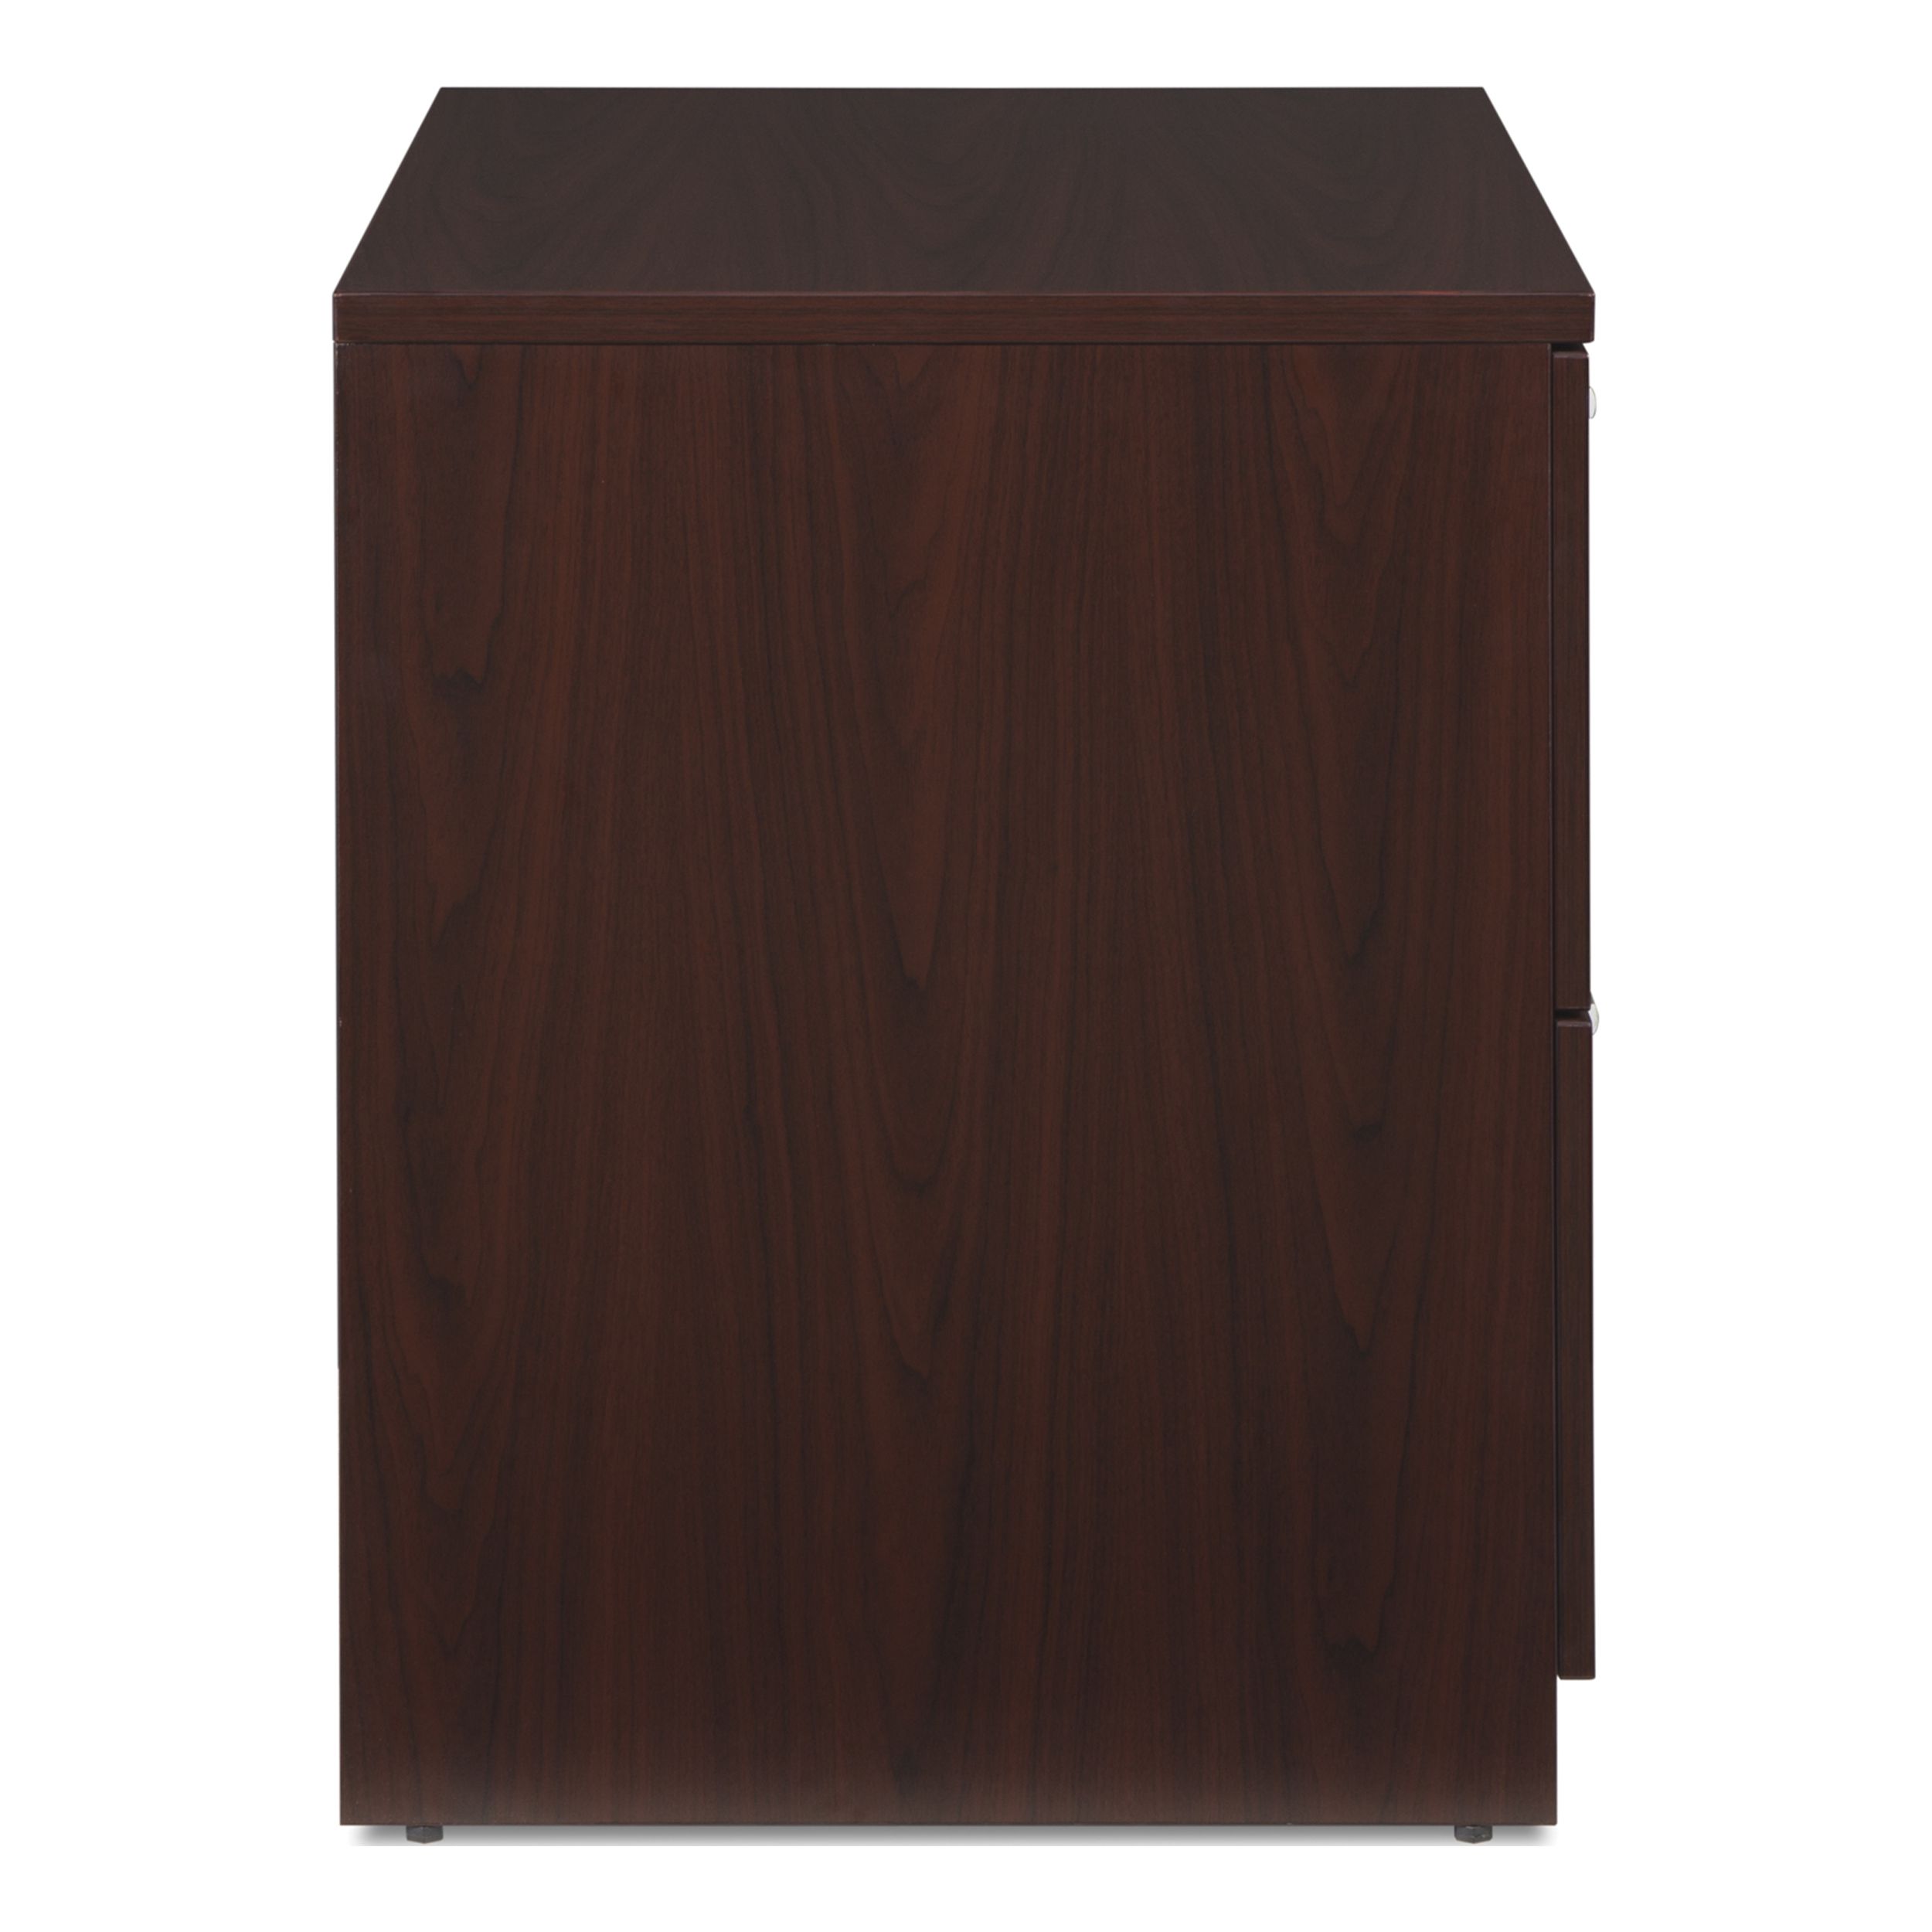 OFM Fulcrum Series Locking Lateral File Cabinet, 2-Drawer Filing Cabinet, Mahogany (CL-L36W-MHG) - image 5 of 9